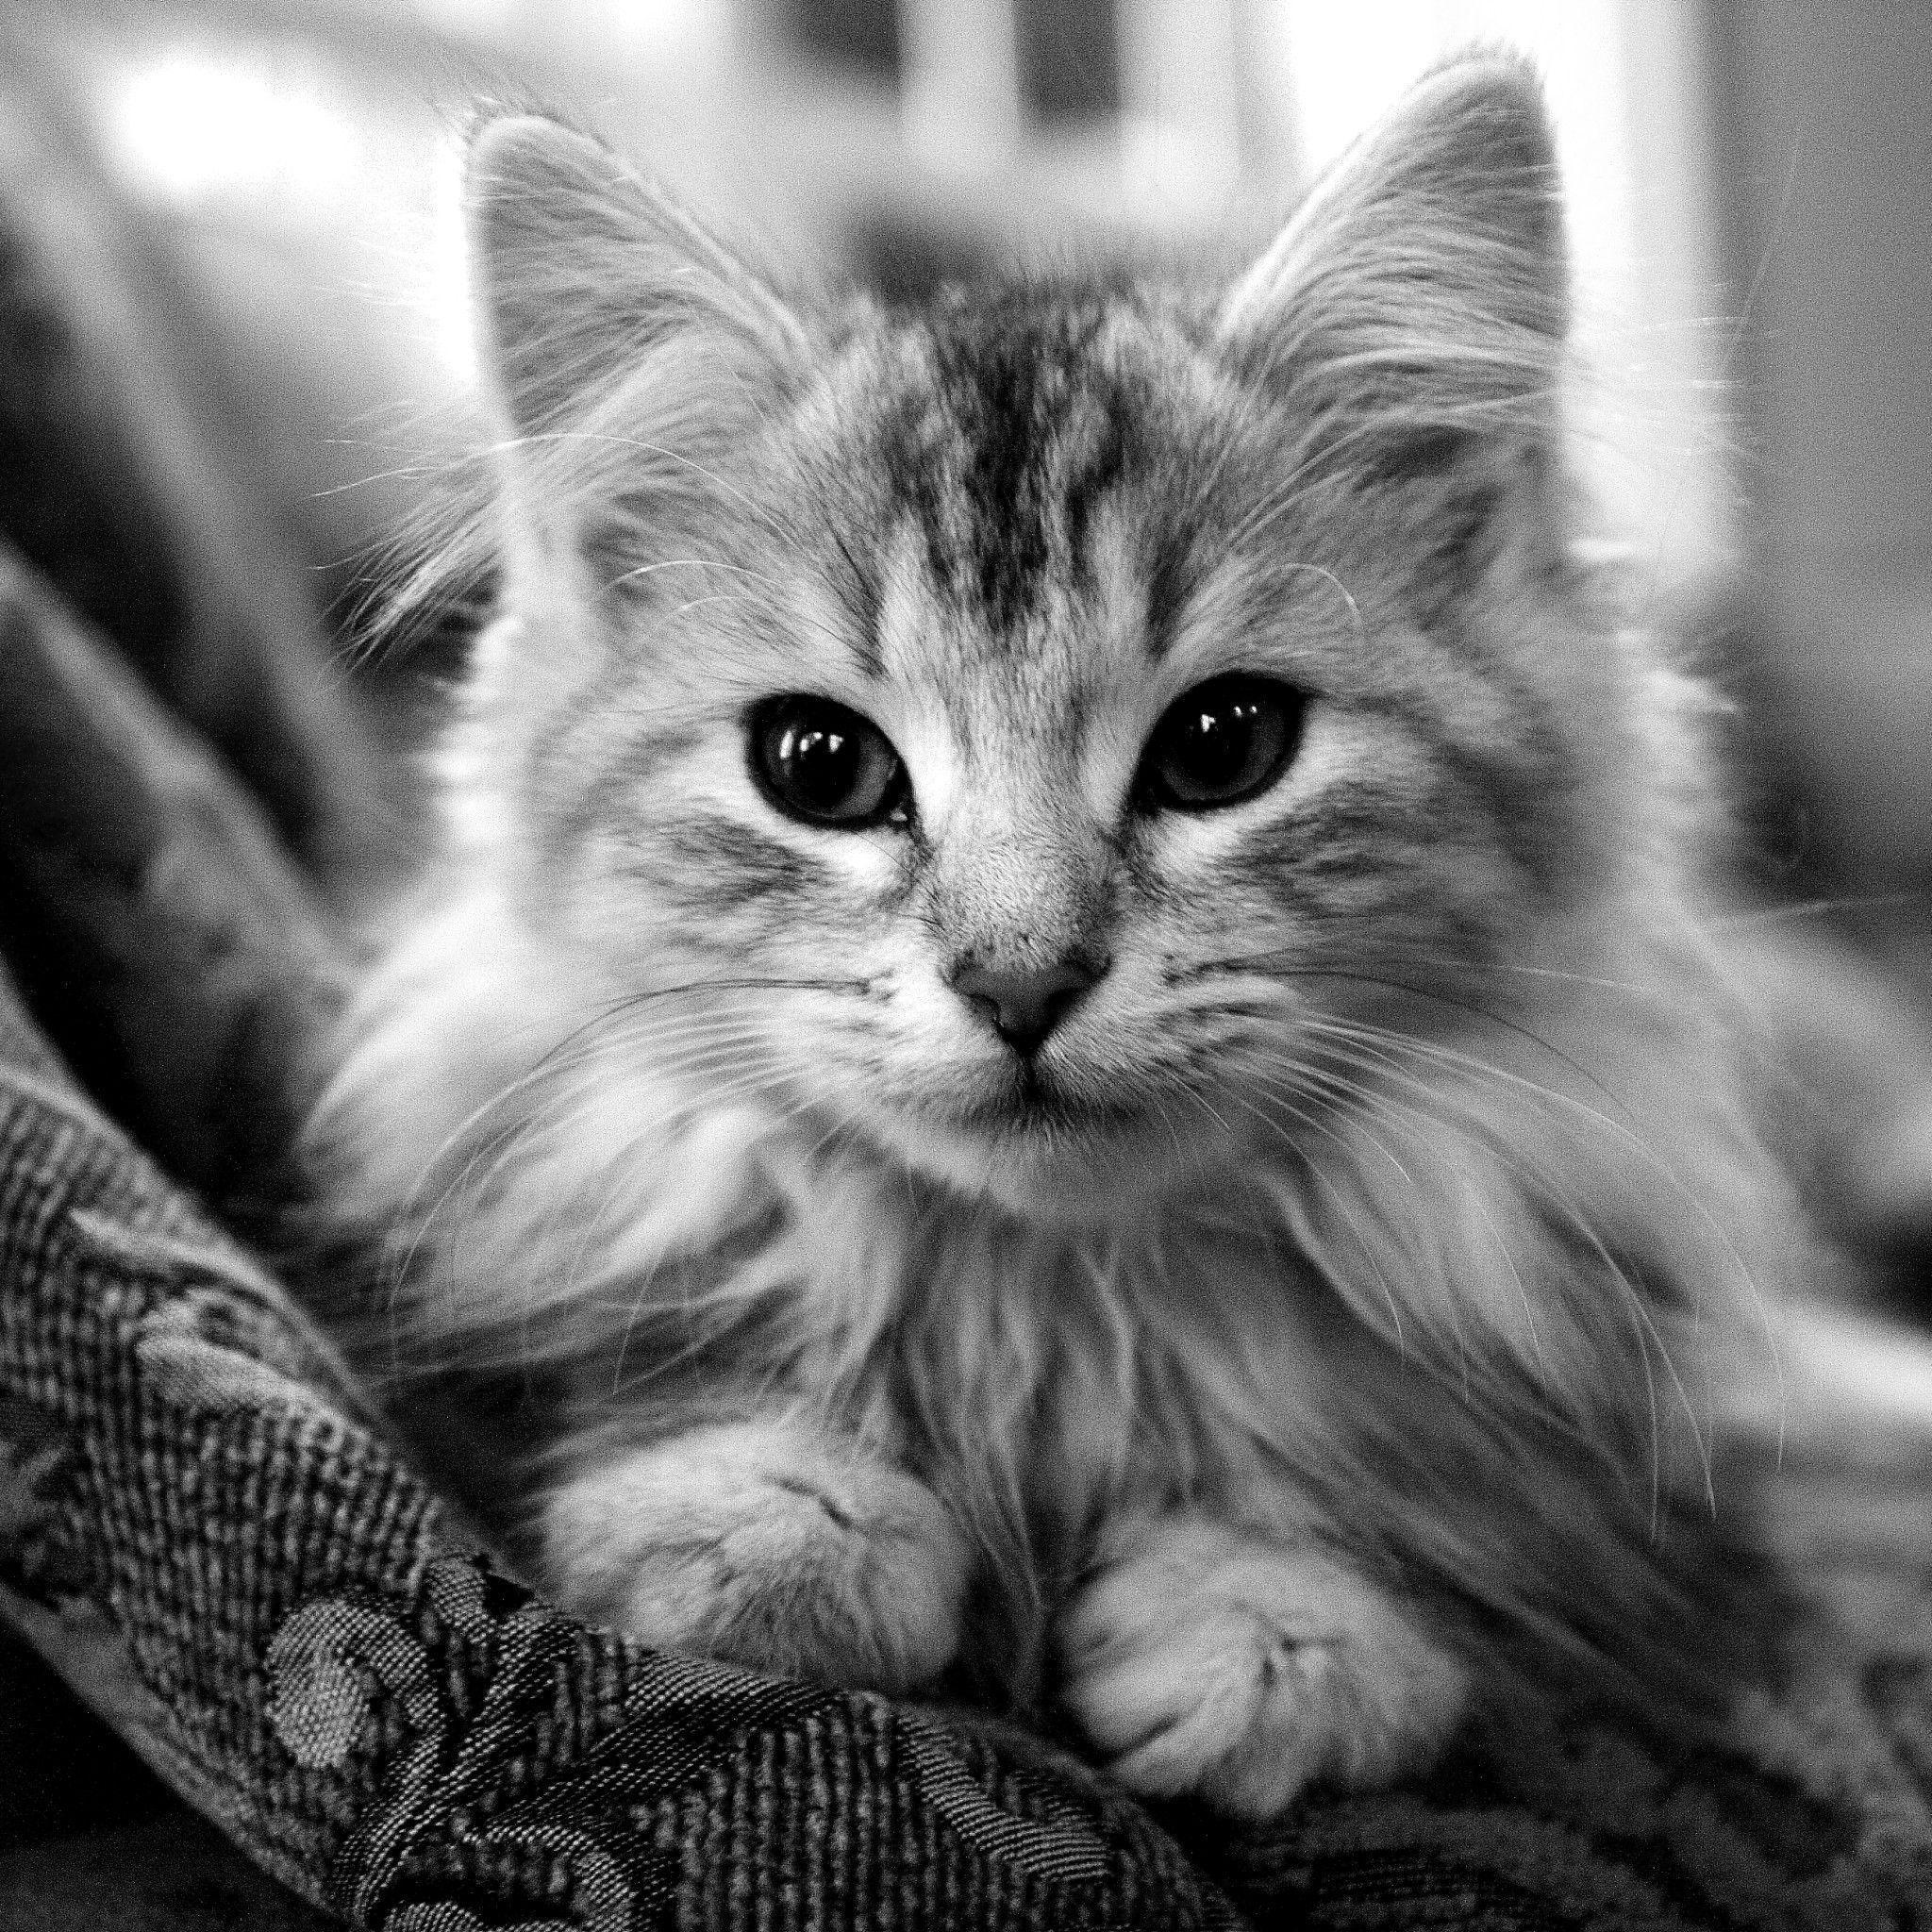 Black and White Cat Wallpapers - Top Free Black and White Cat